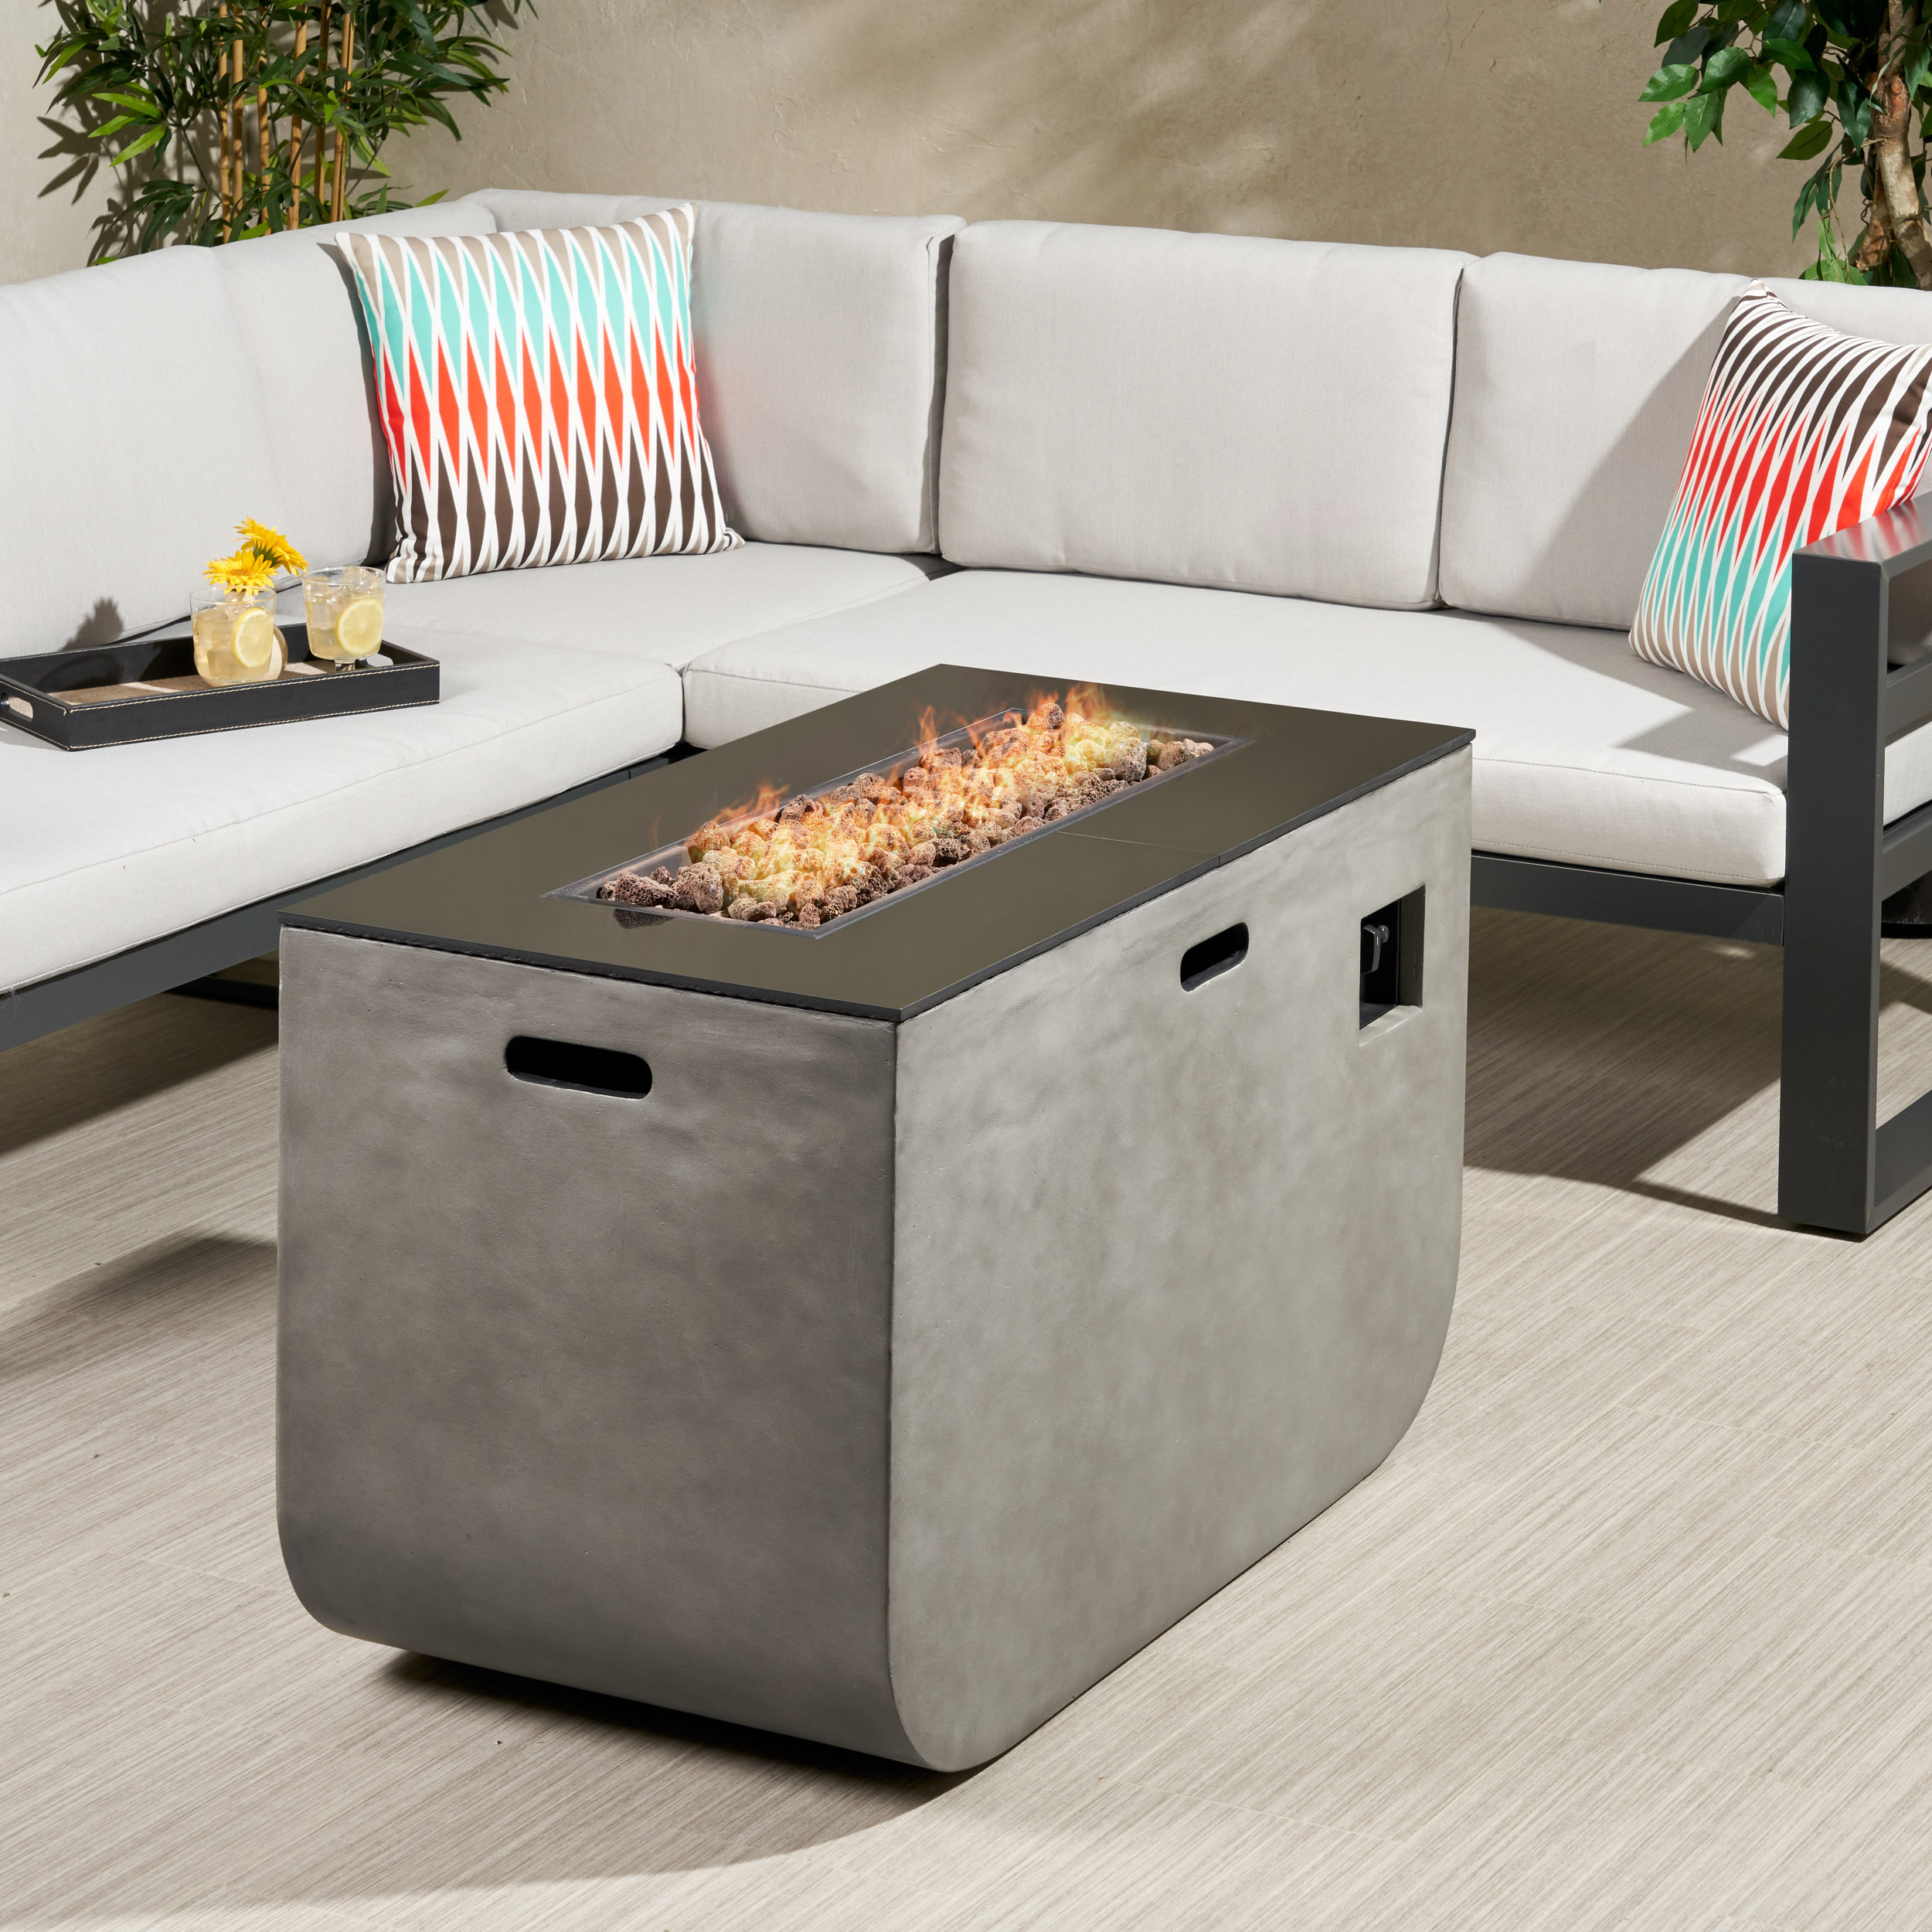 Noble House Adio 40" Rectangular Fire Pit in Light Gray and Black - image 1 of 8